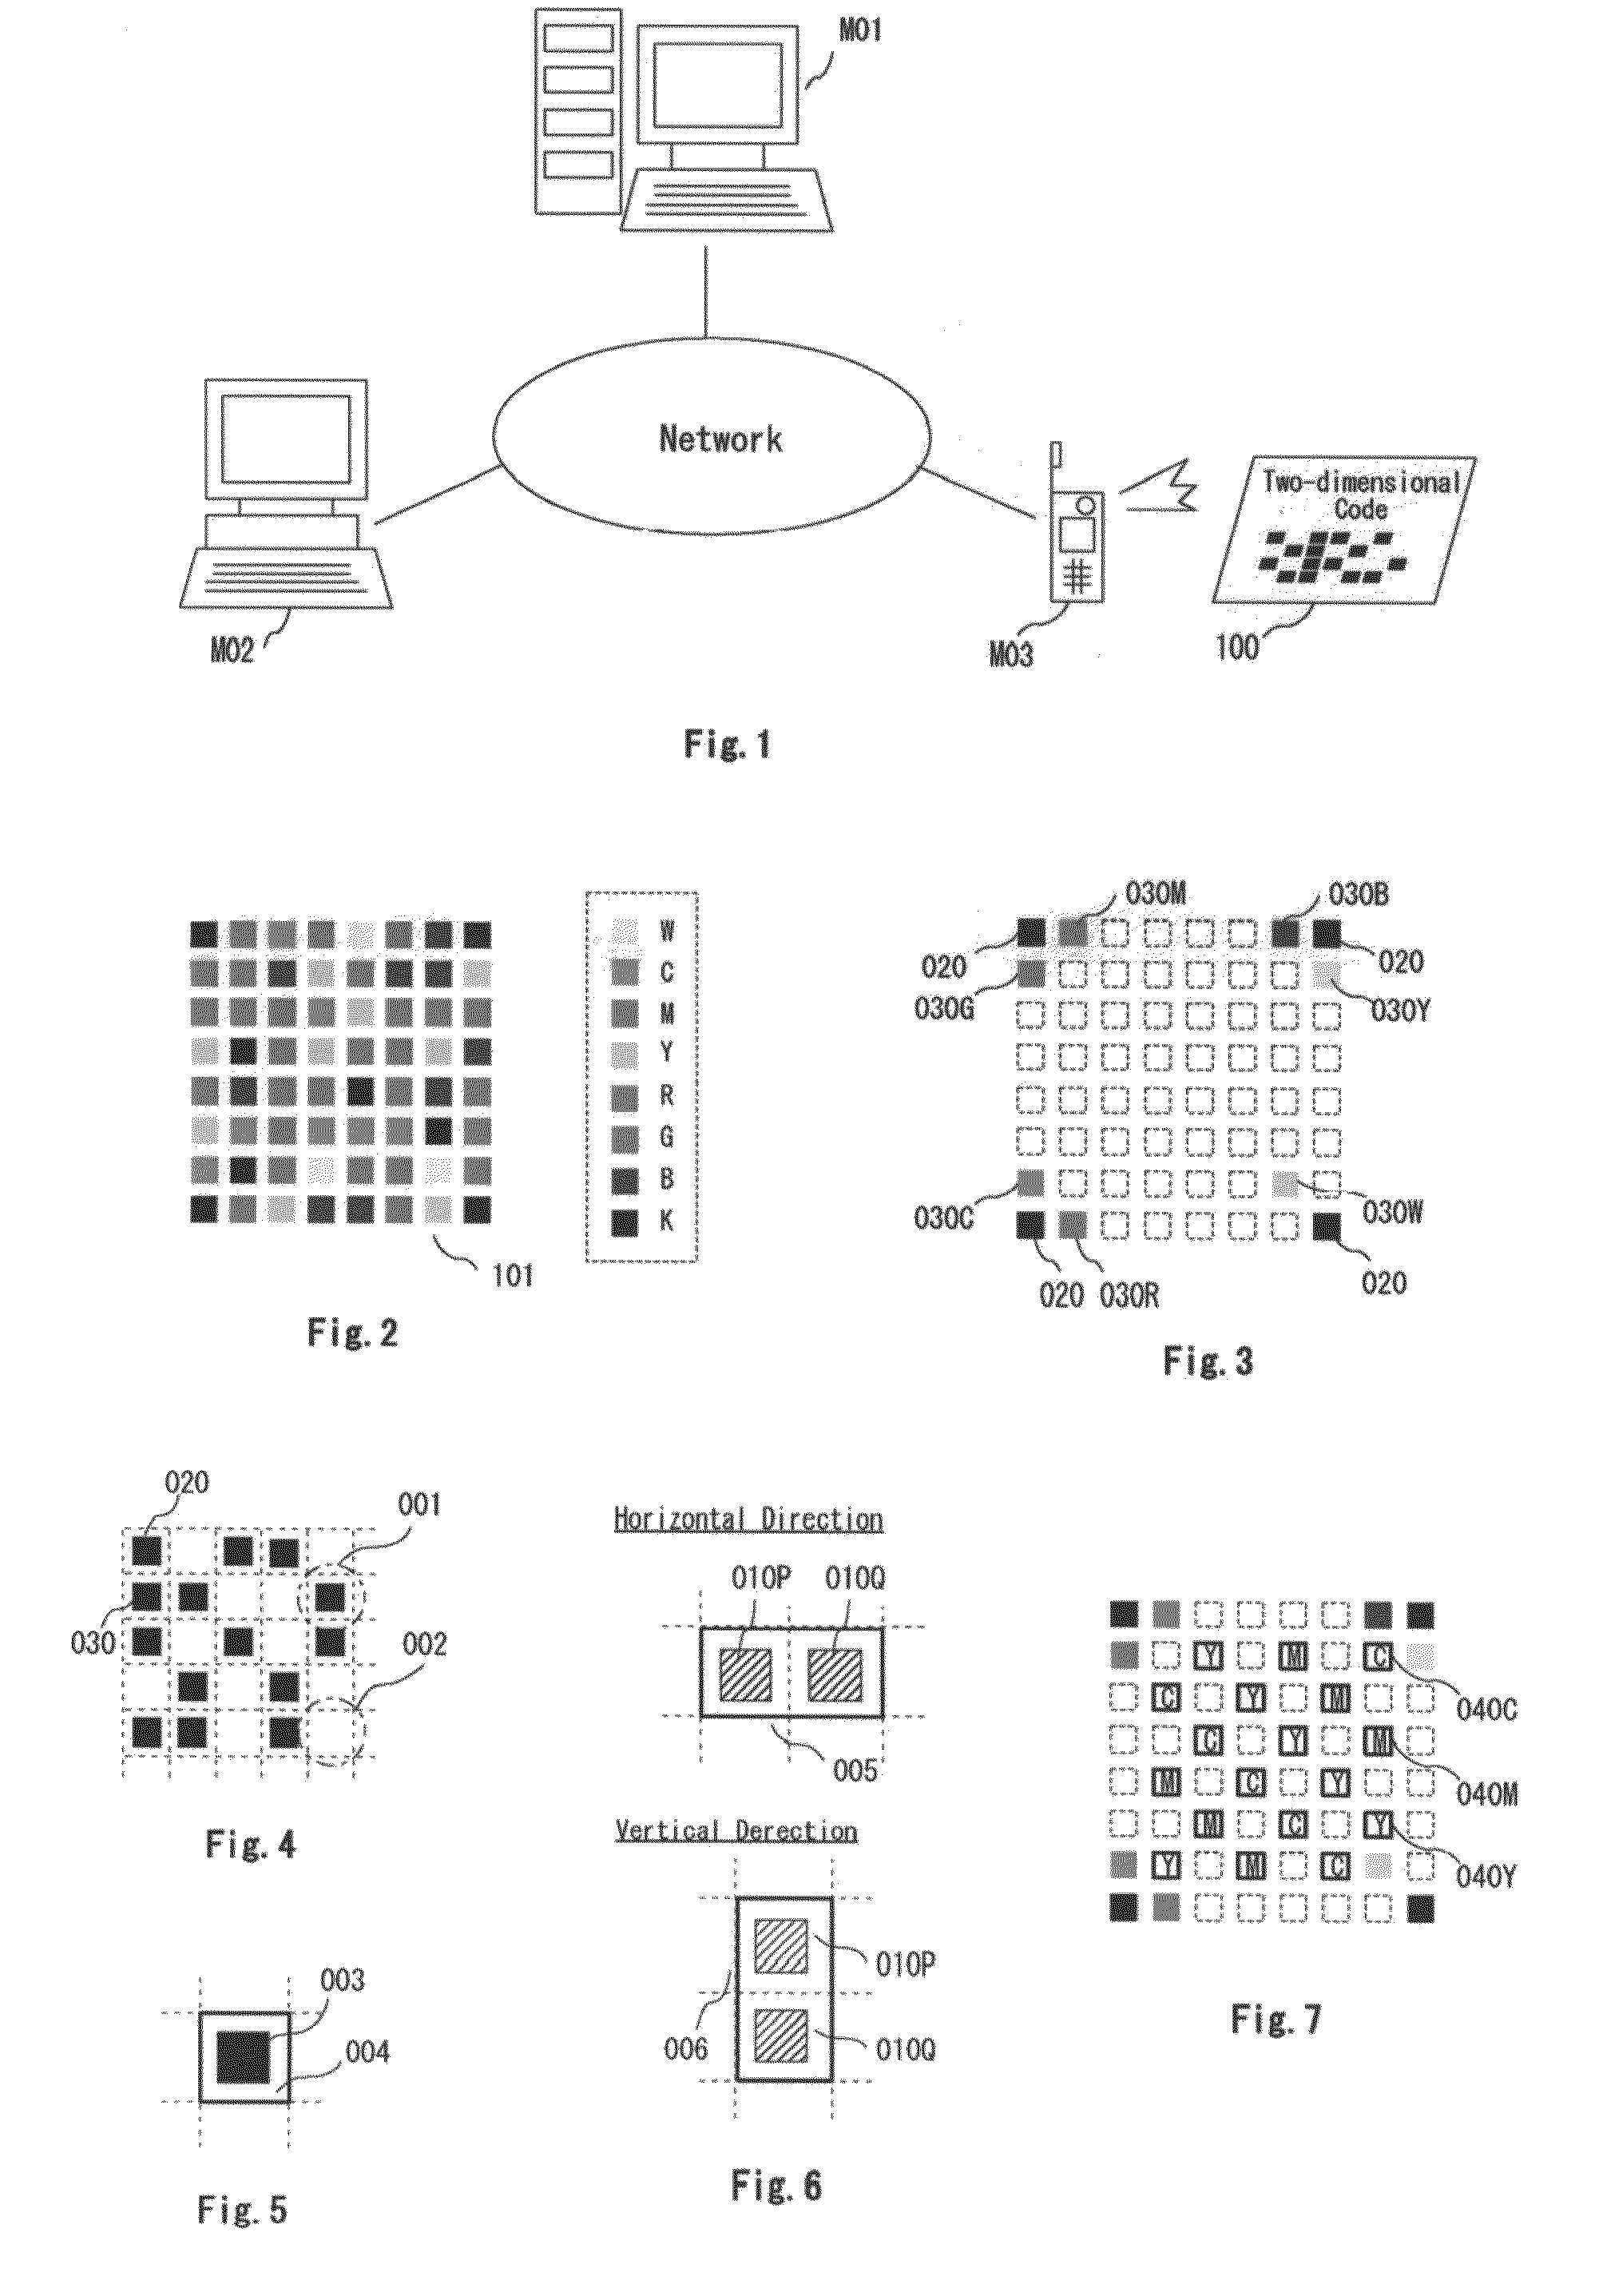 Two-dimensional code publishing program and two-dimensional code decoding program